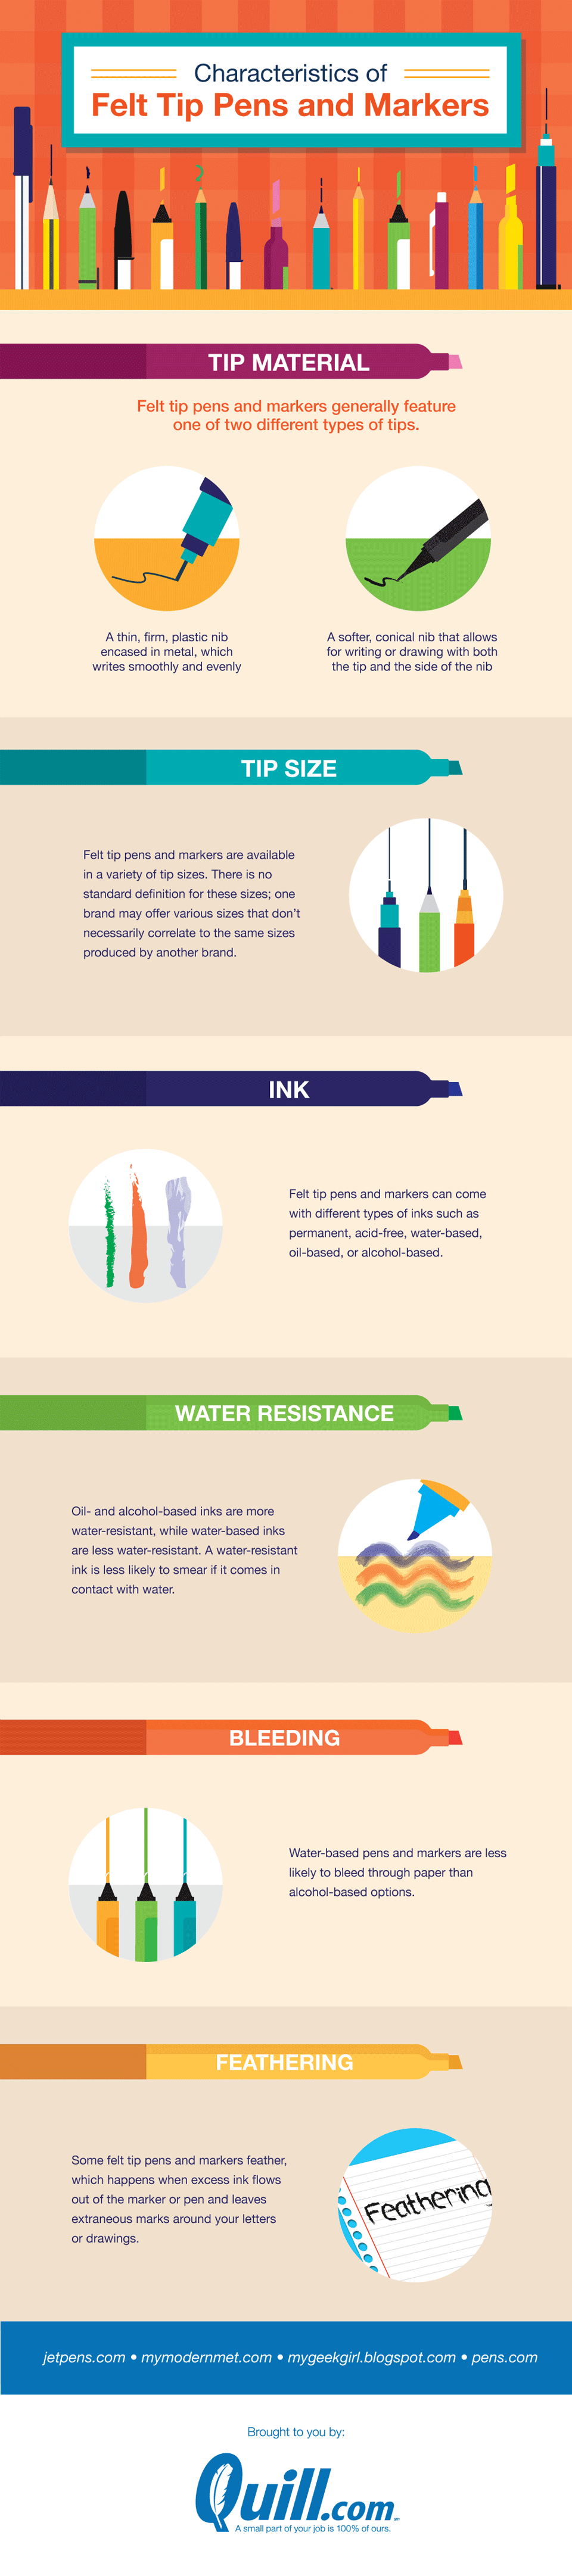 Guide to felt tip pens and markers | Quill.com